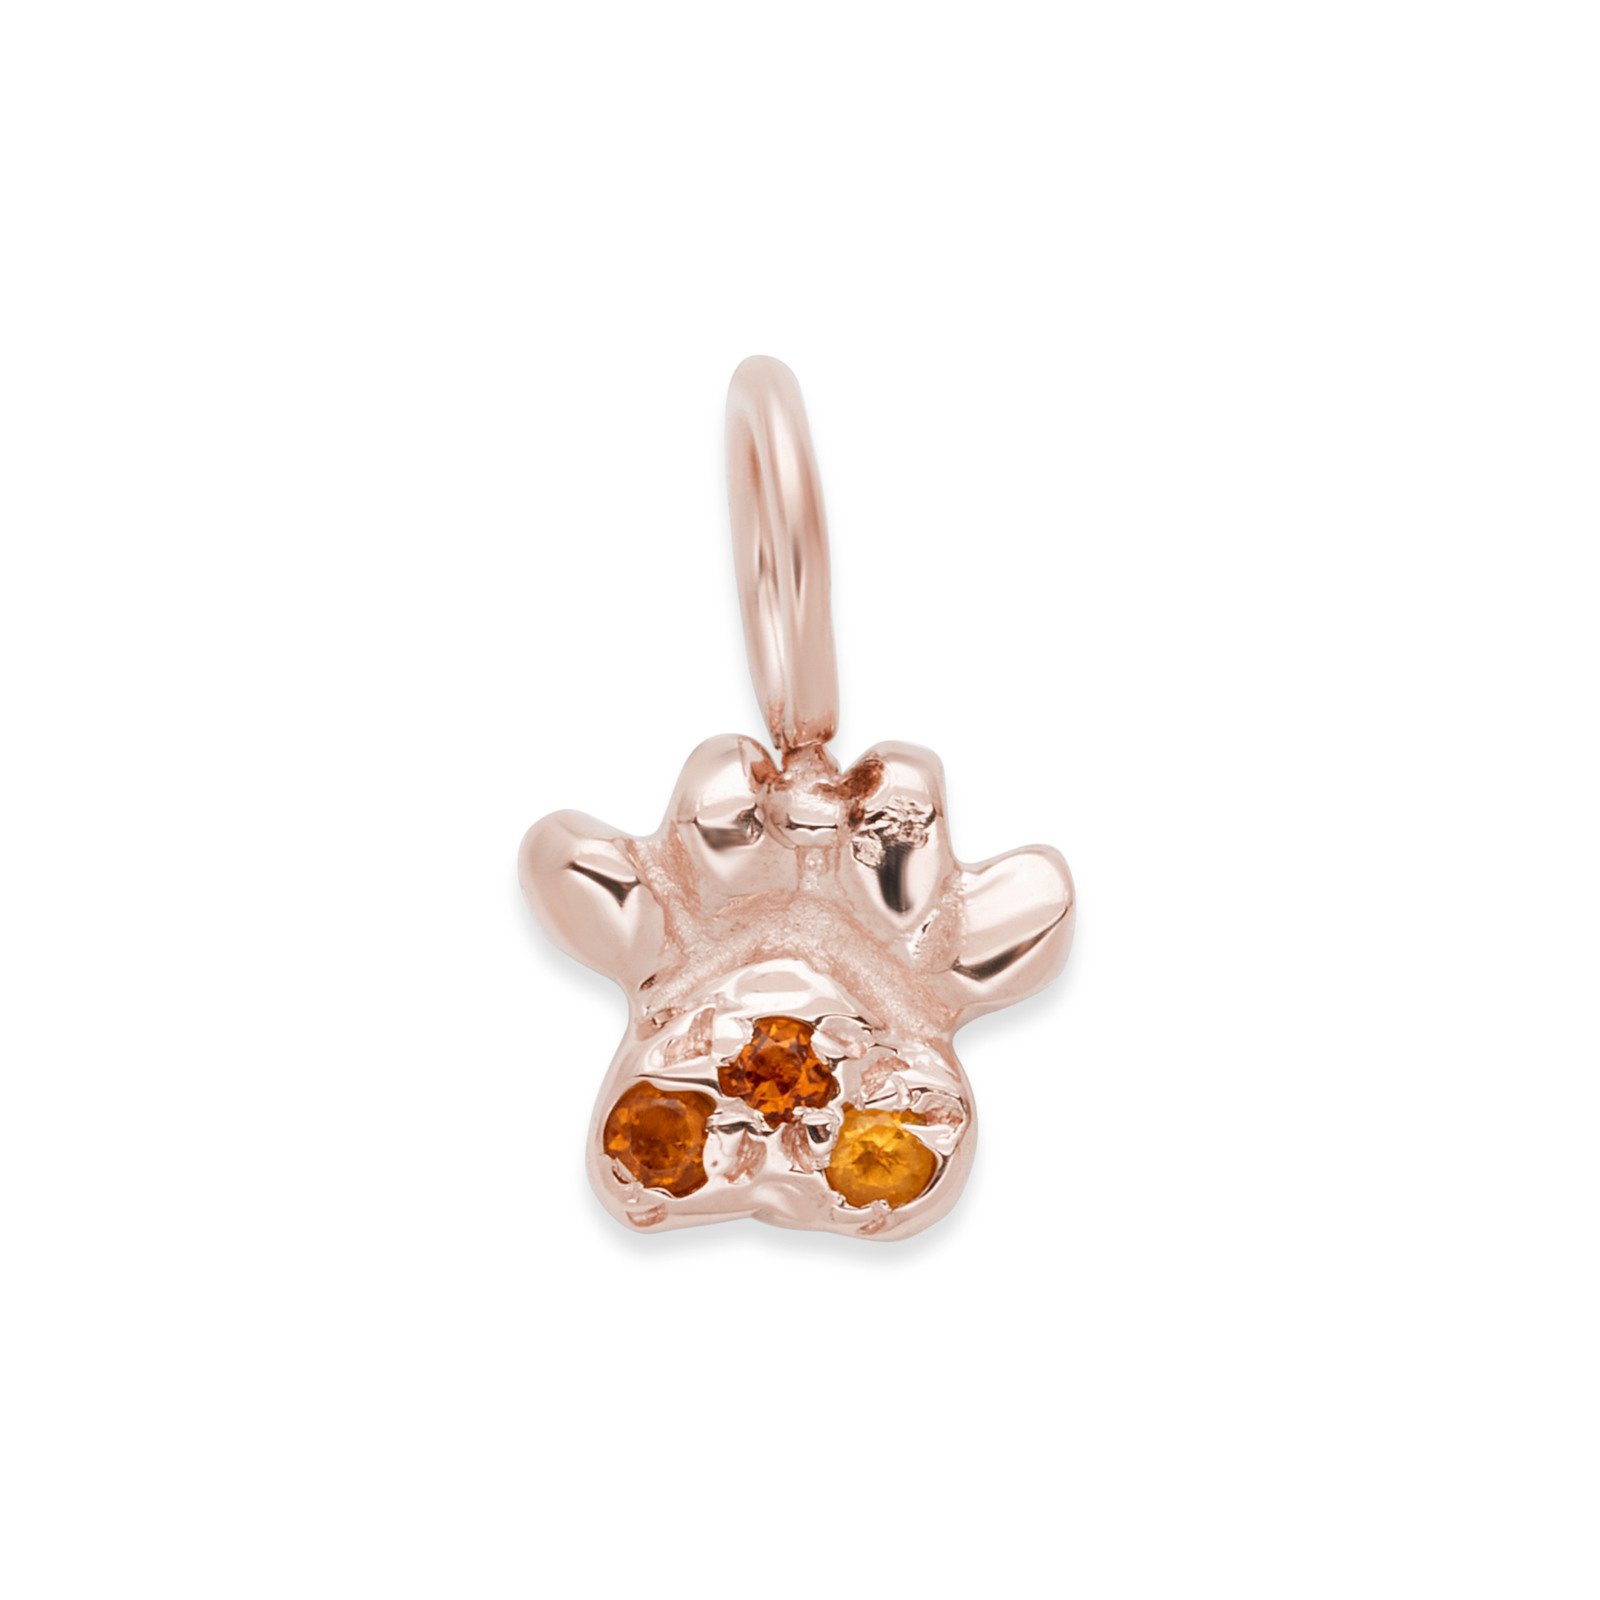 Paw shaped 14k pink gold charm with citrines - cusotmize which gemstones or meaningful birthstones